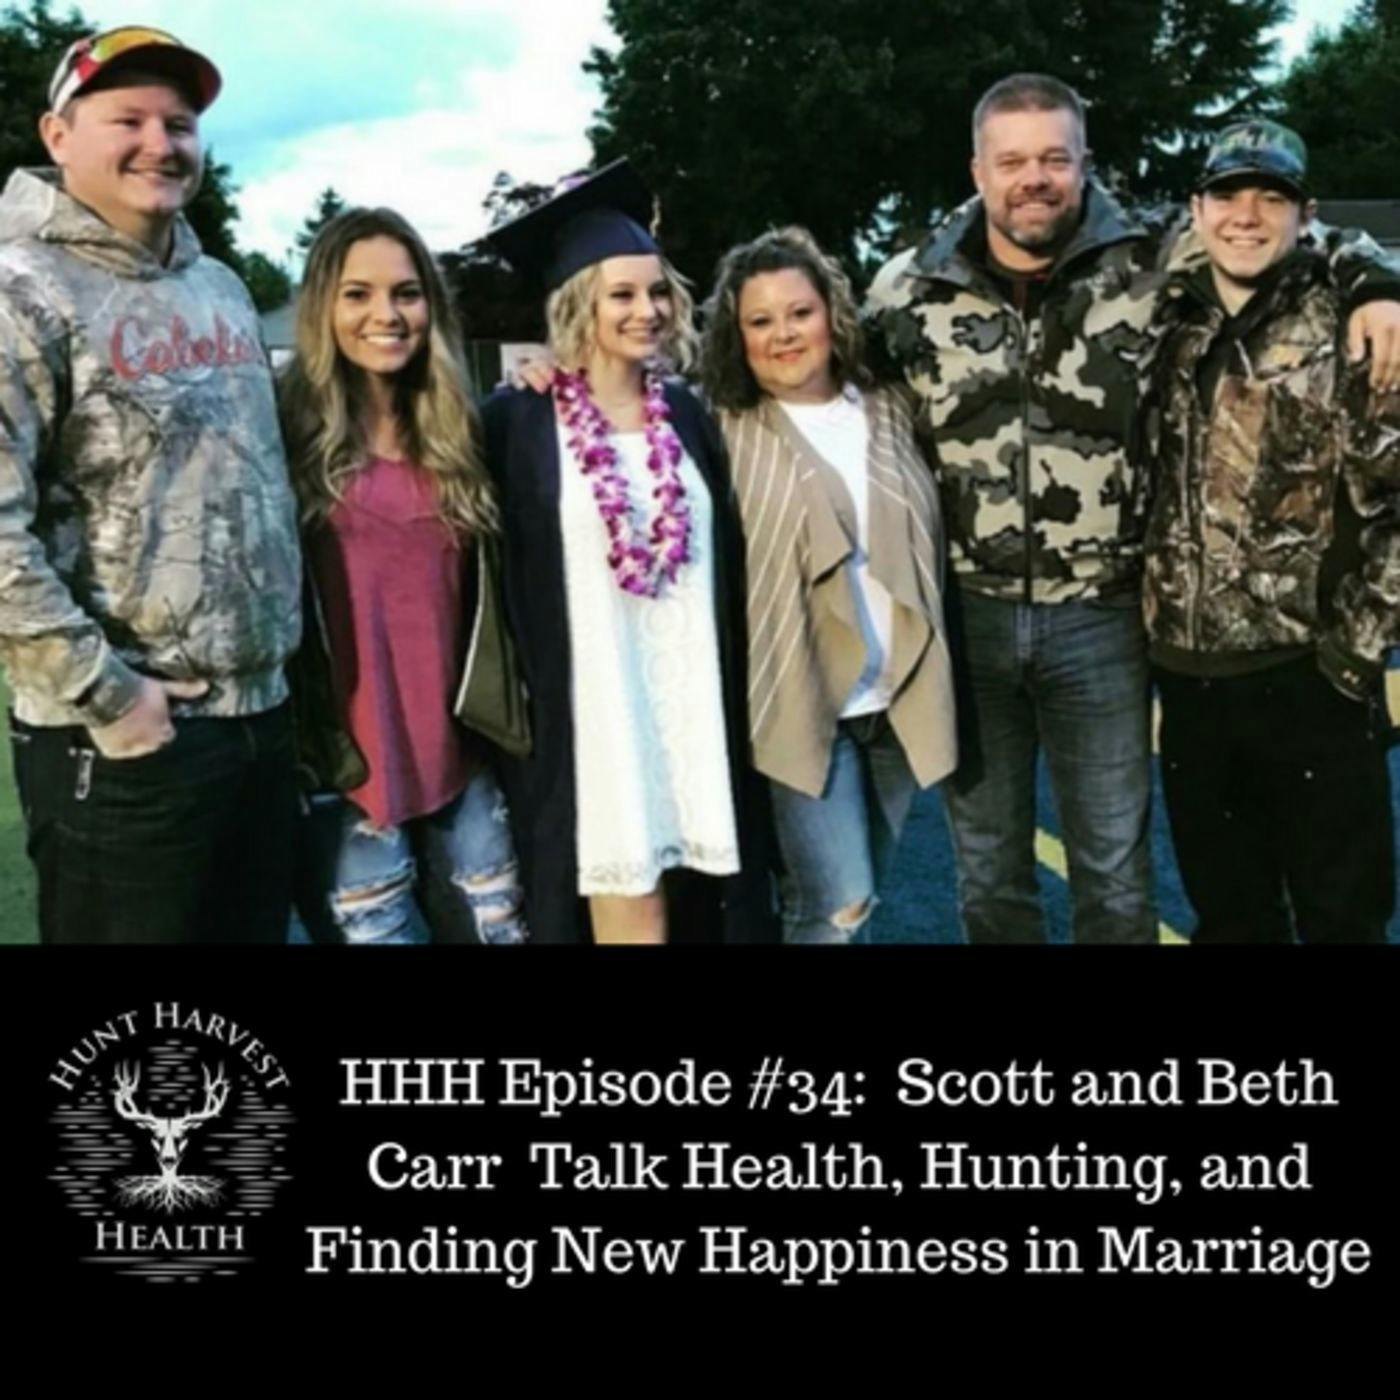 Episode #34: Scott and Beth Carr Talk Health, Hunting, and Finding New Happiness in Marriage